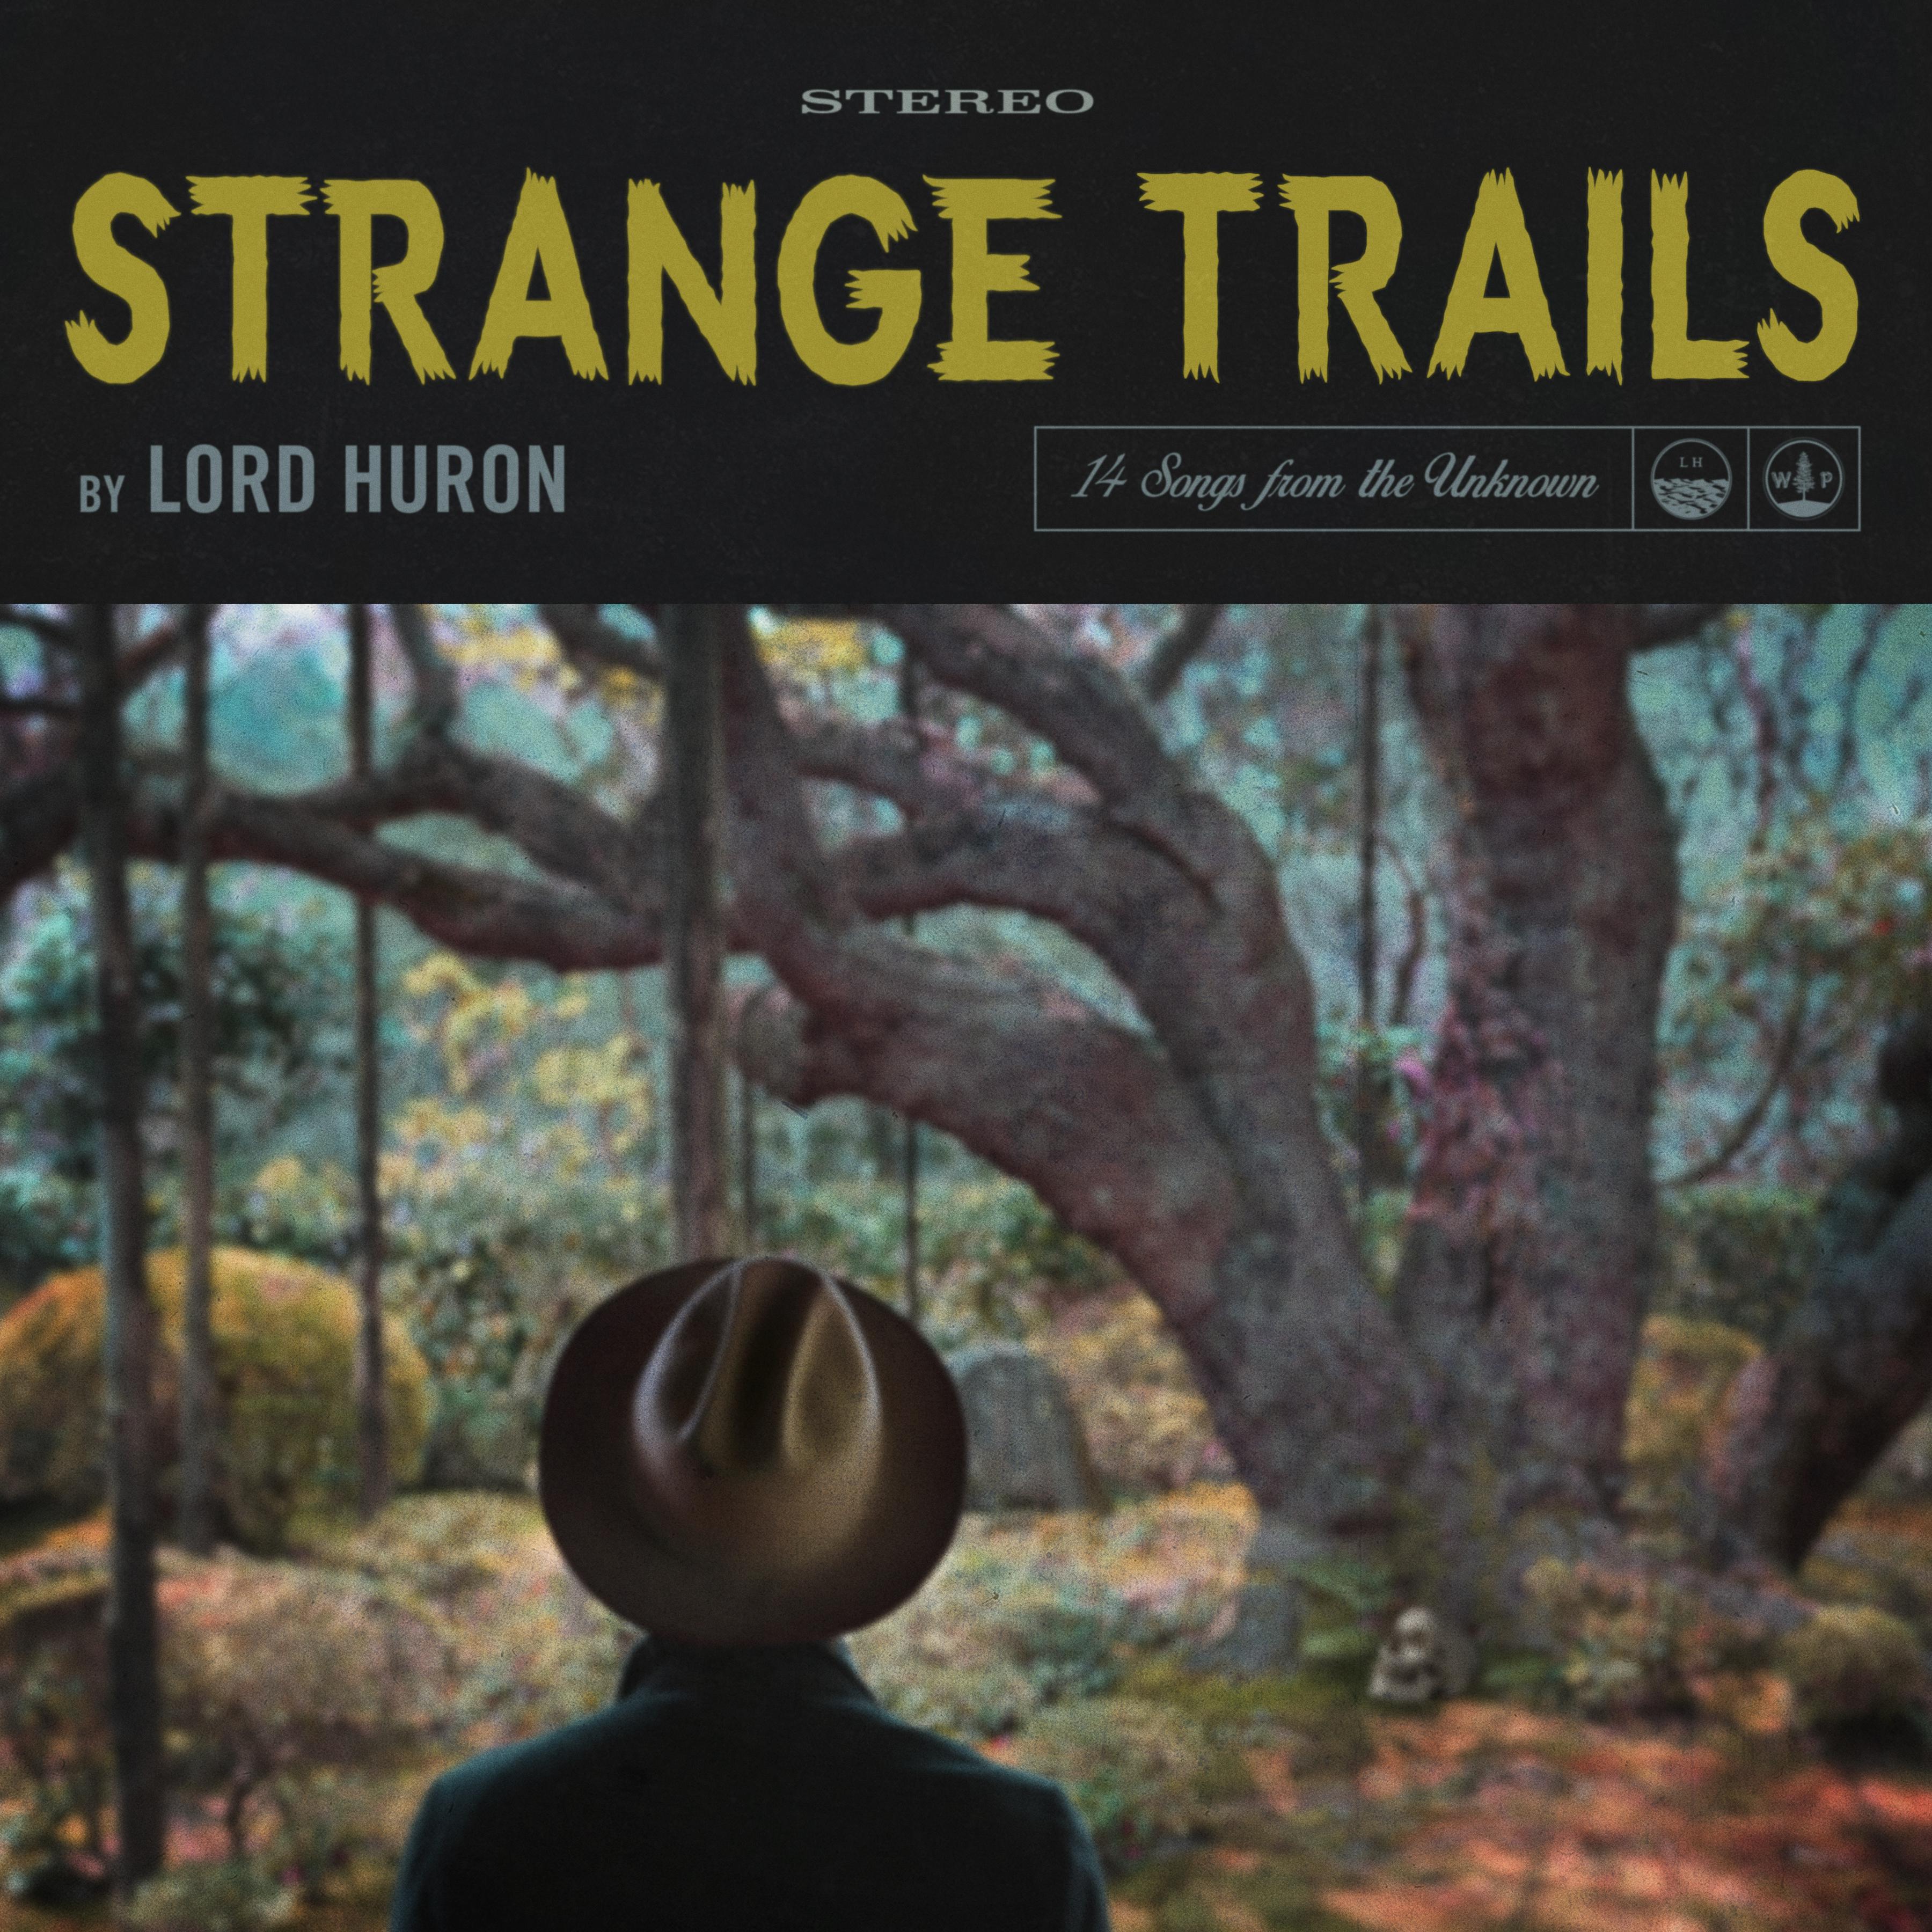 Lord Huron - The Yawning Grave